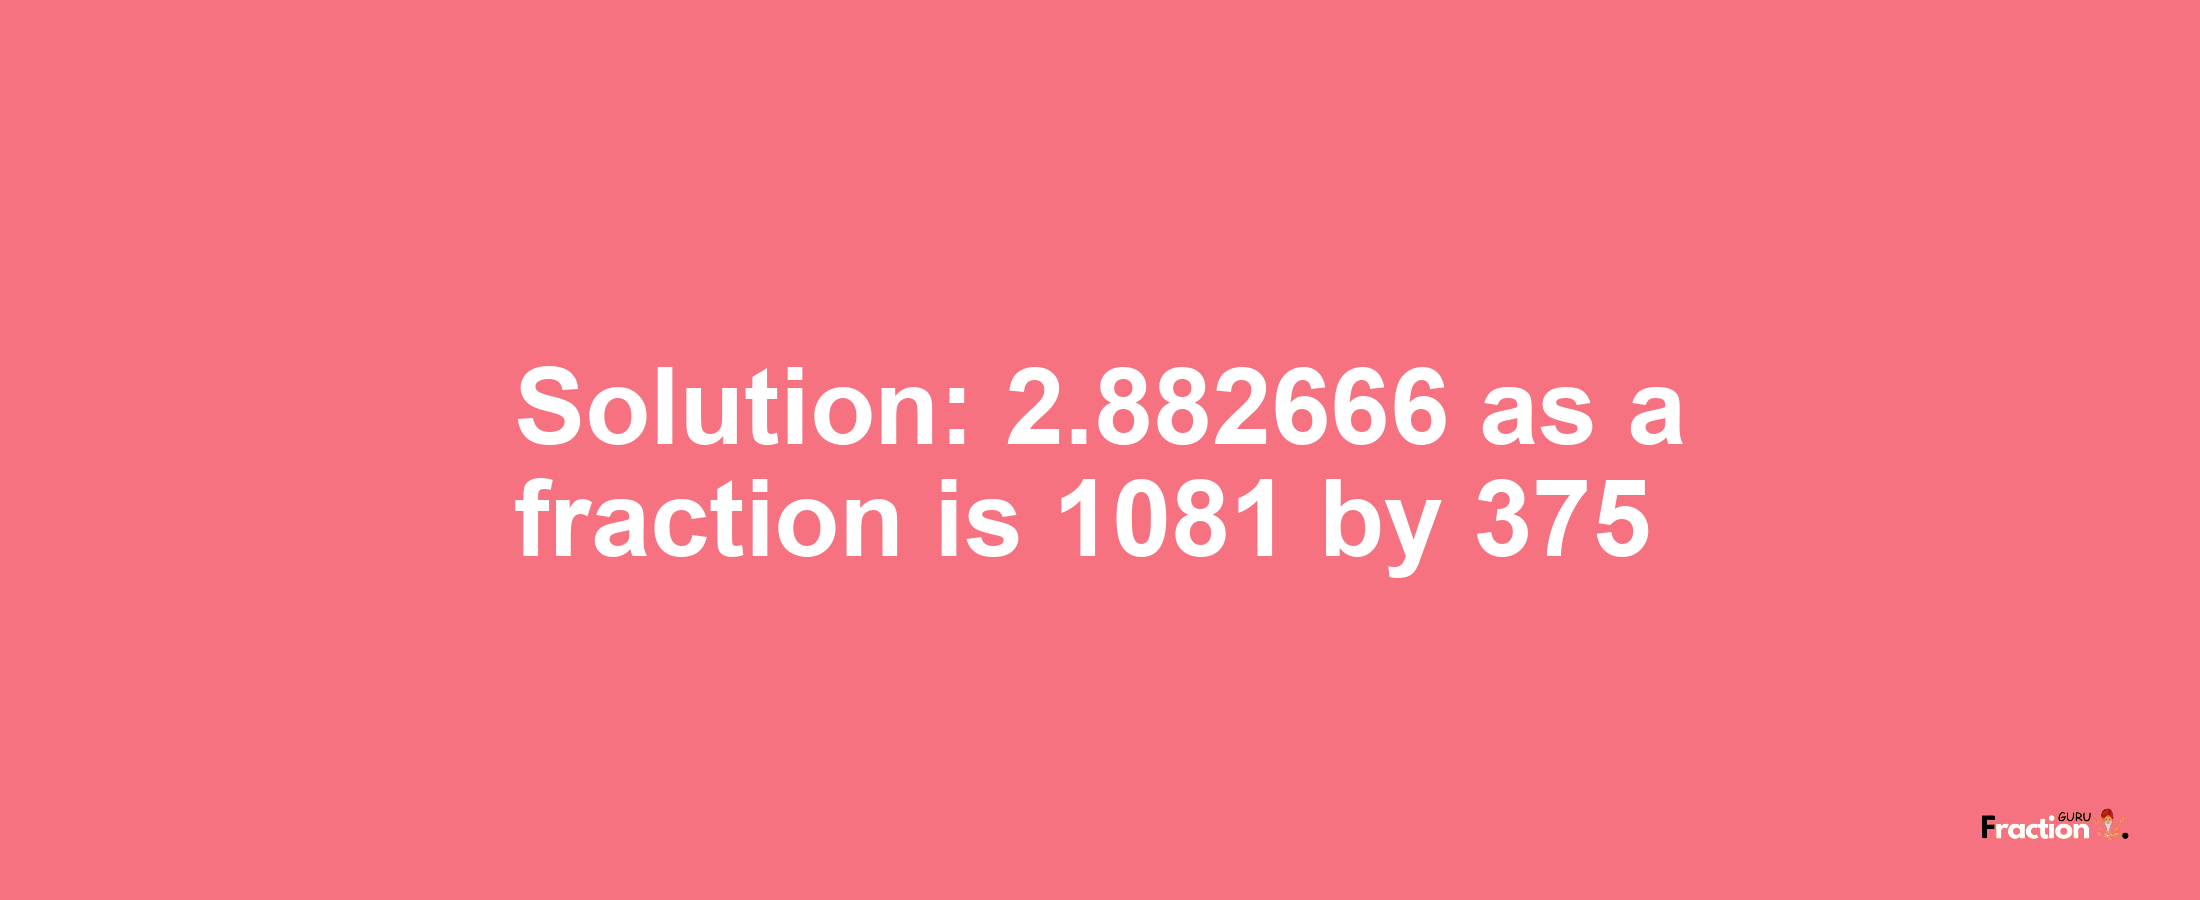 Solution:2.882666 as a fraction is 1081/375